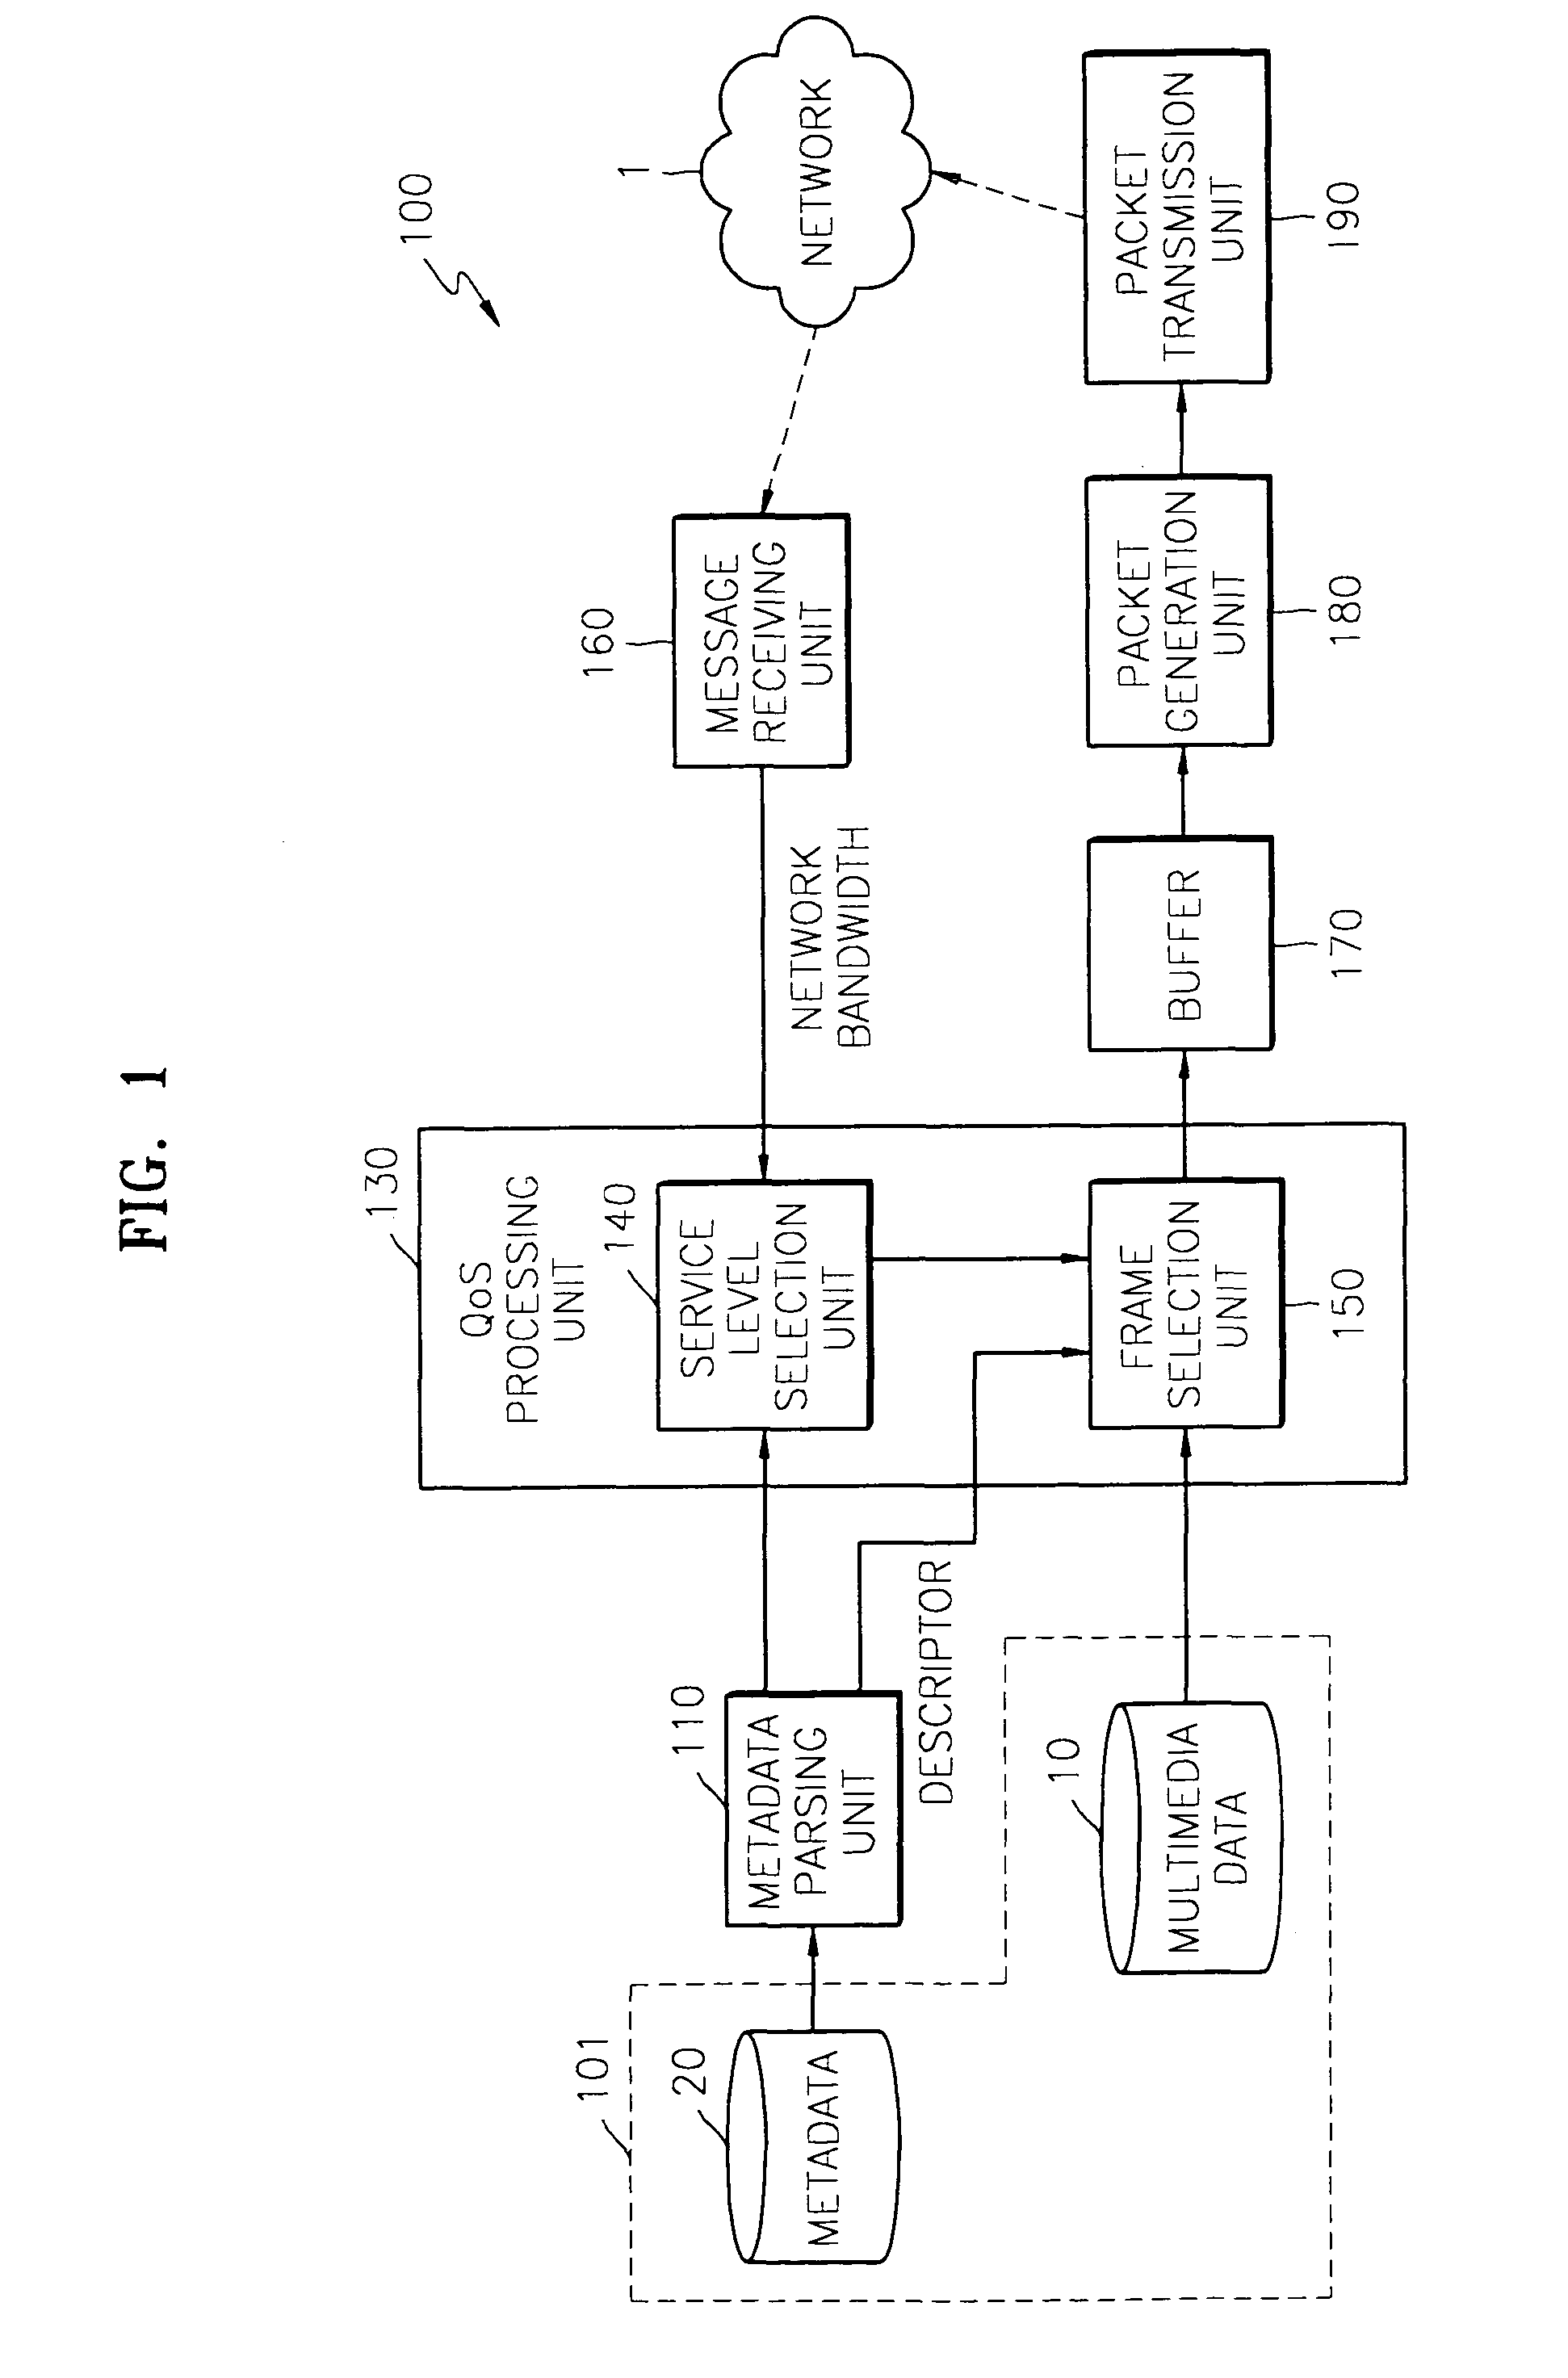 Apparatus and method for streaming multimedia data